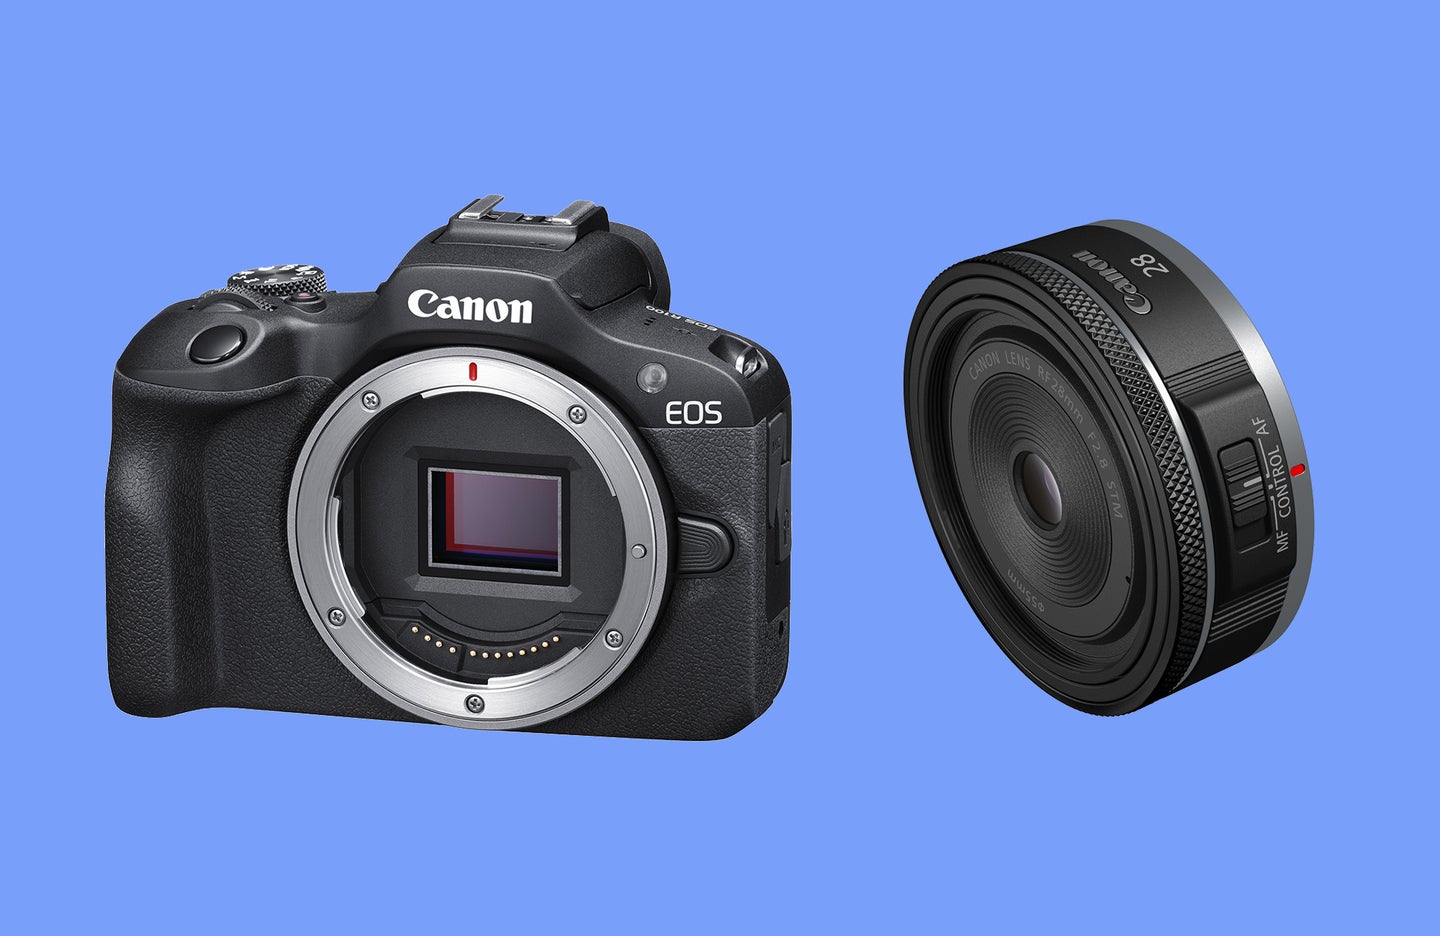 The Canon EOS R100 is the most affordable and compact EOS R camera yet